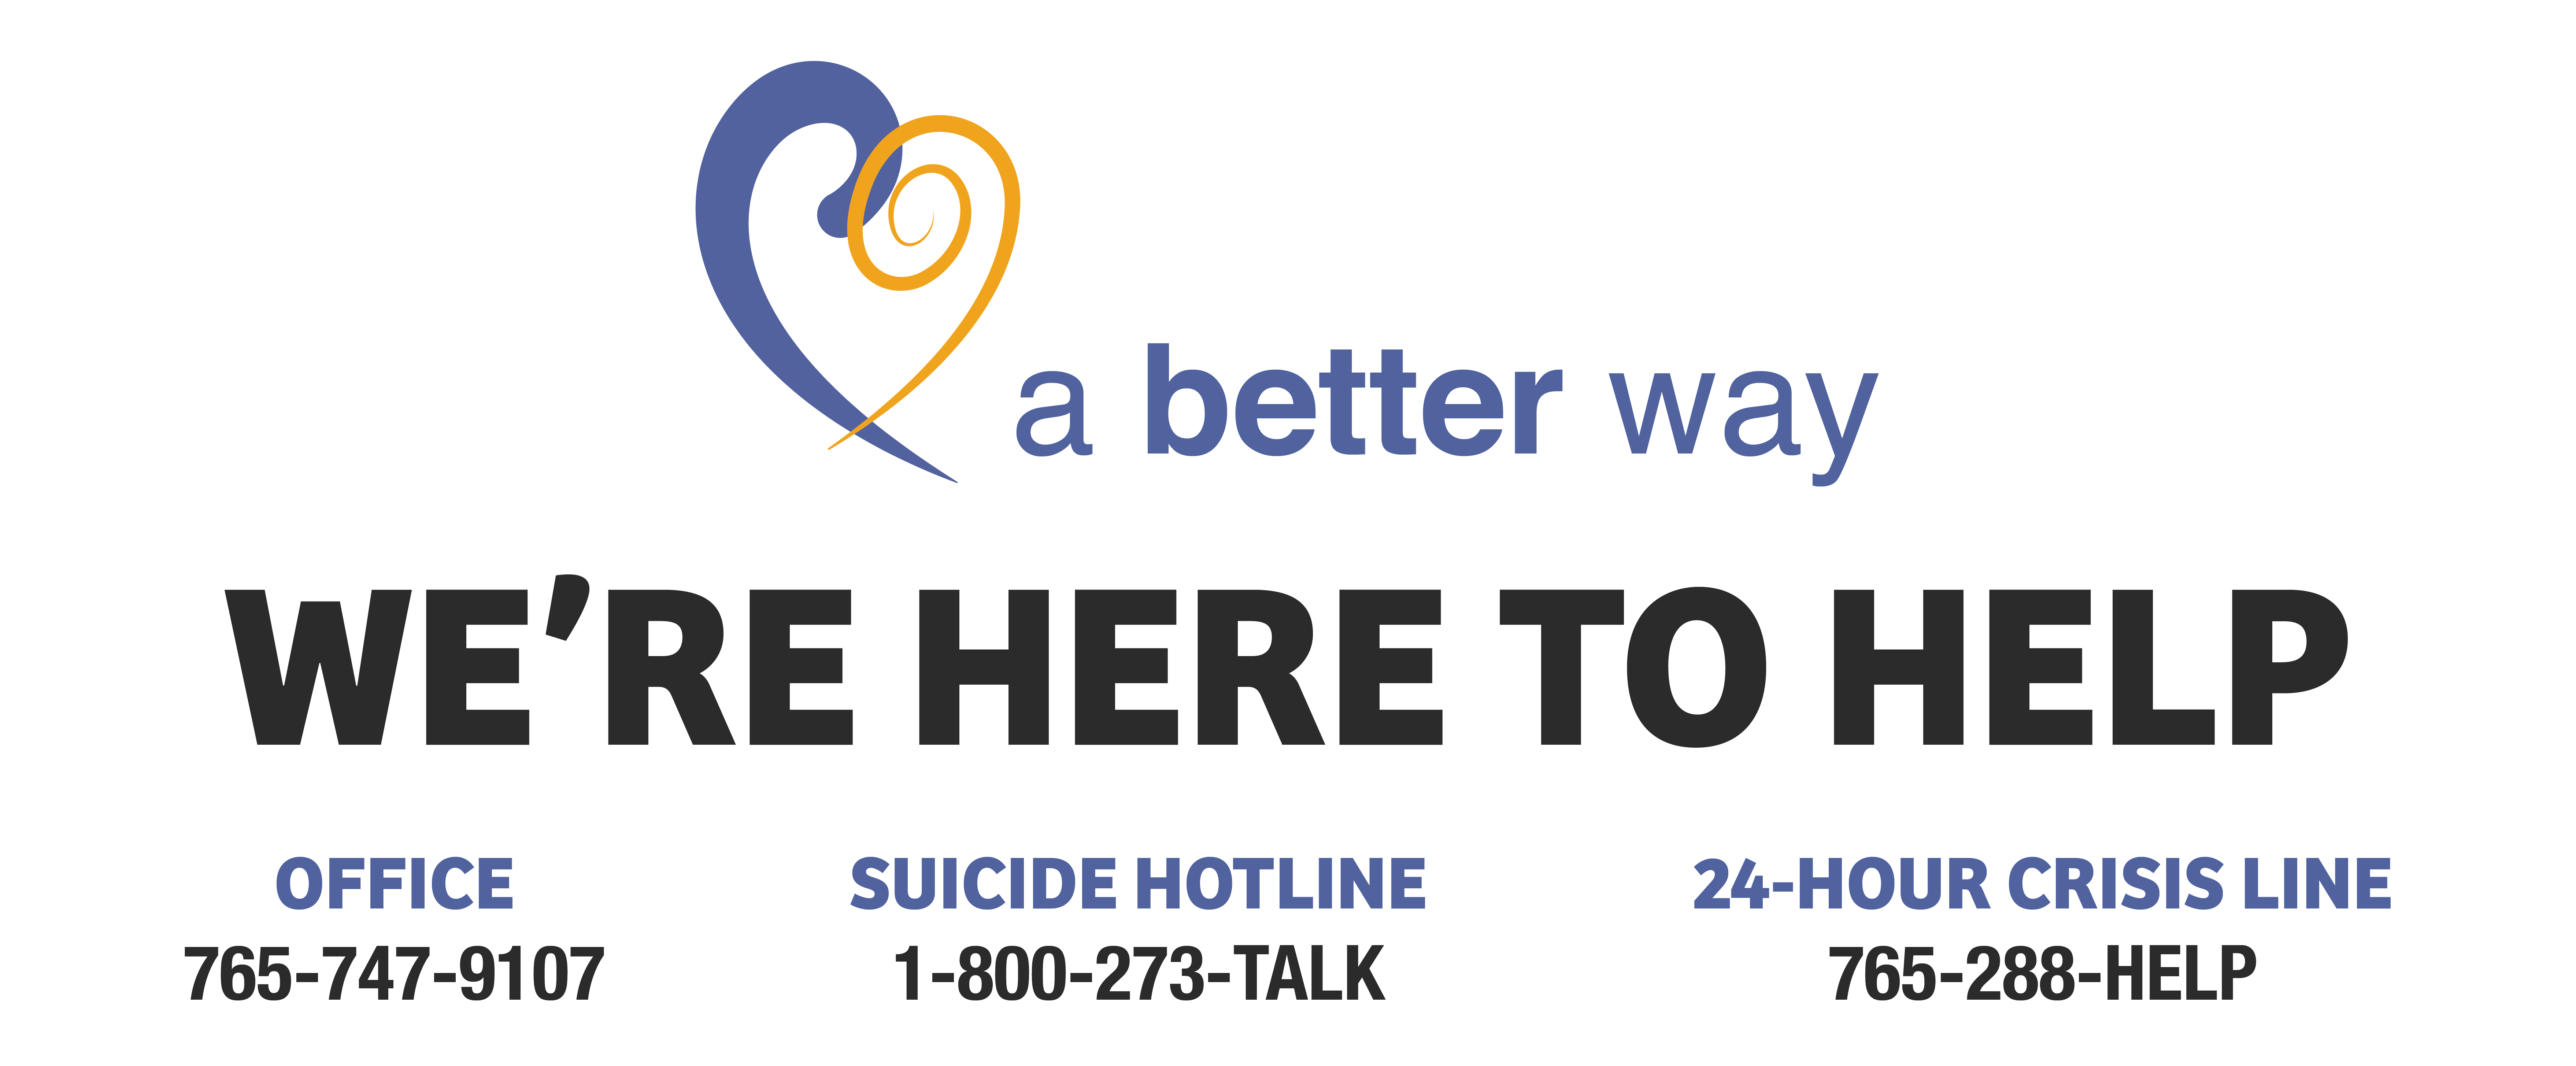 A Better Way, We're Here To Help! Office: 765-747-9107, Suicide Hotline: 1-800-273-TALK, Crisis Hotline: 765-288-HELP